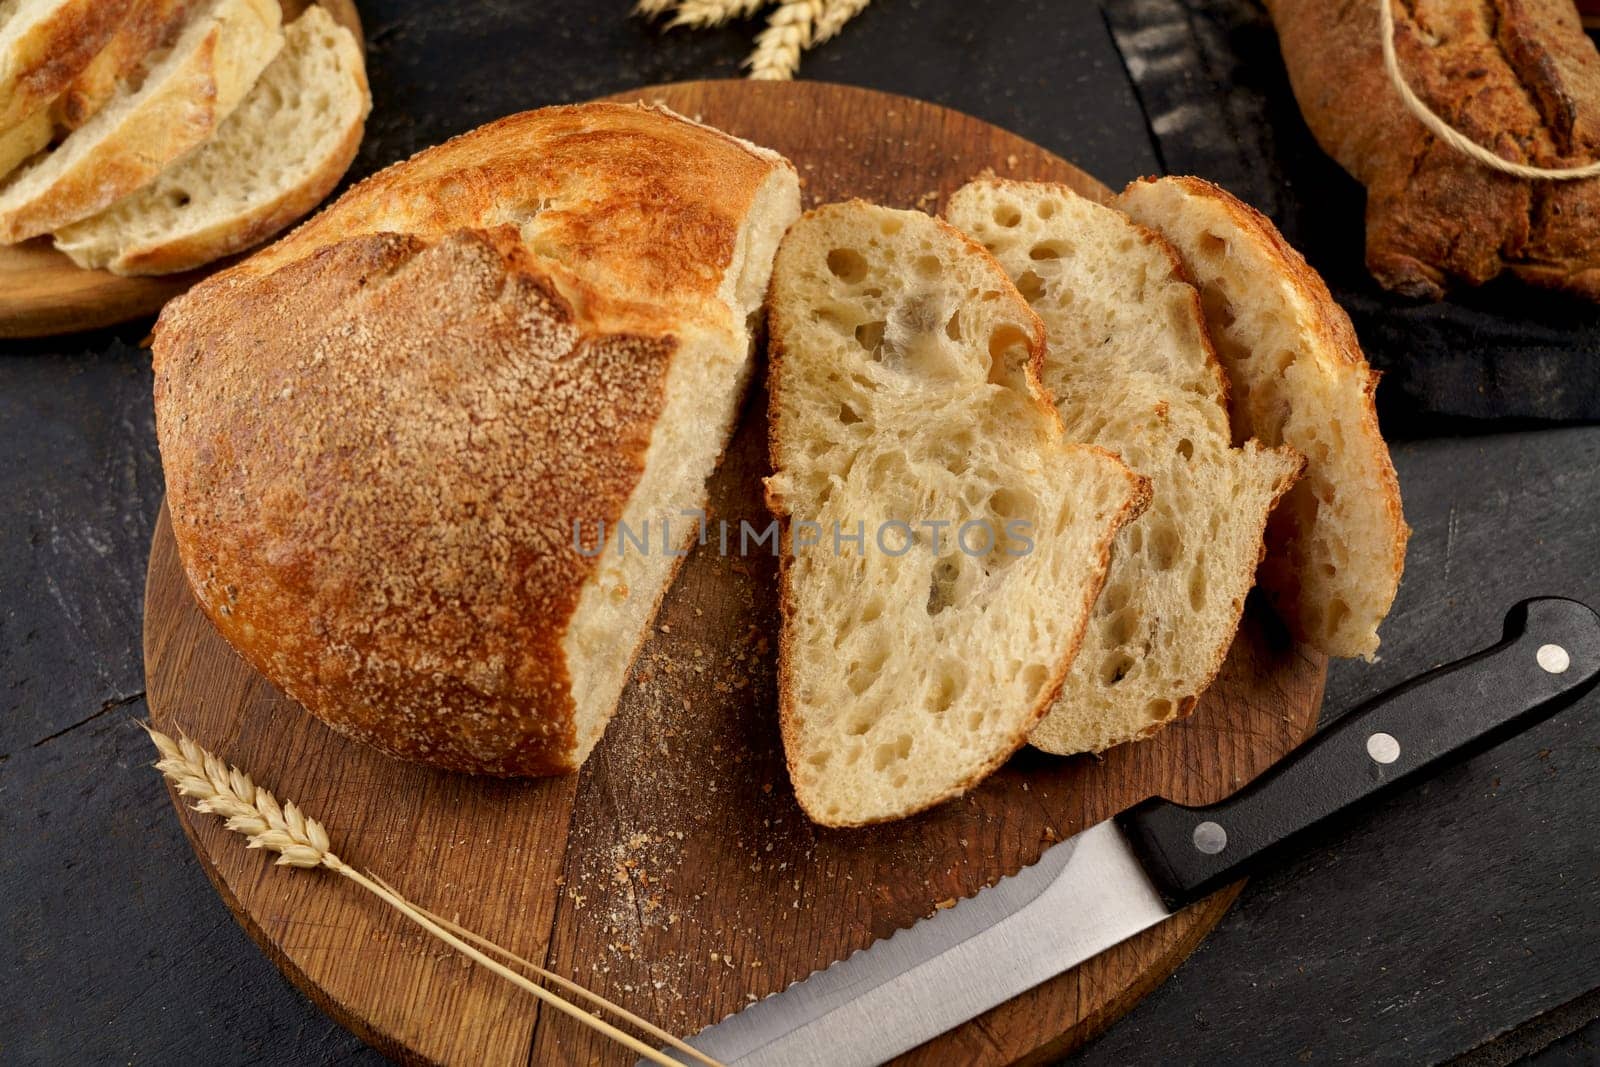 Fresh bread slice and cutting knife on rustic table Round loaf of freshly baked sourdough bread with knife on cutting board. Concept of homemade bread, natural farm products, domestic production. Healthy and tasty organic food.